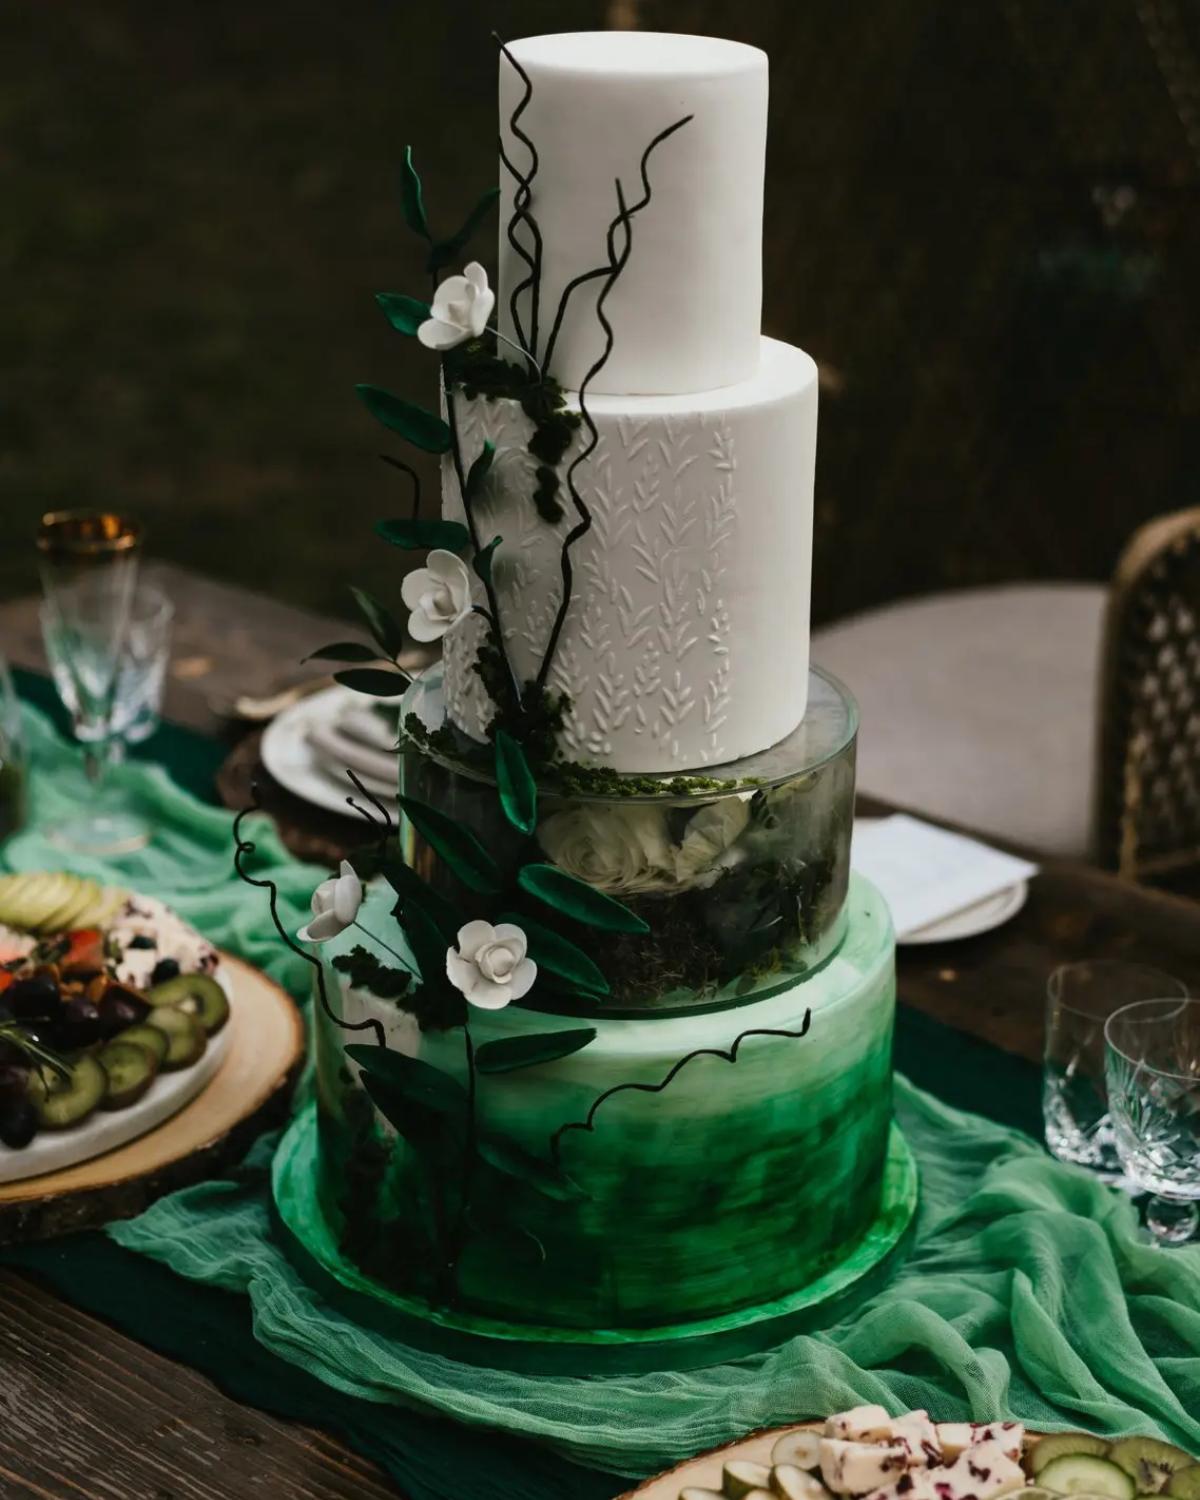 Wedding Cake Ideas: The Best—And Most Unusual—Wedding Cakes in Vogue | Vogue